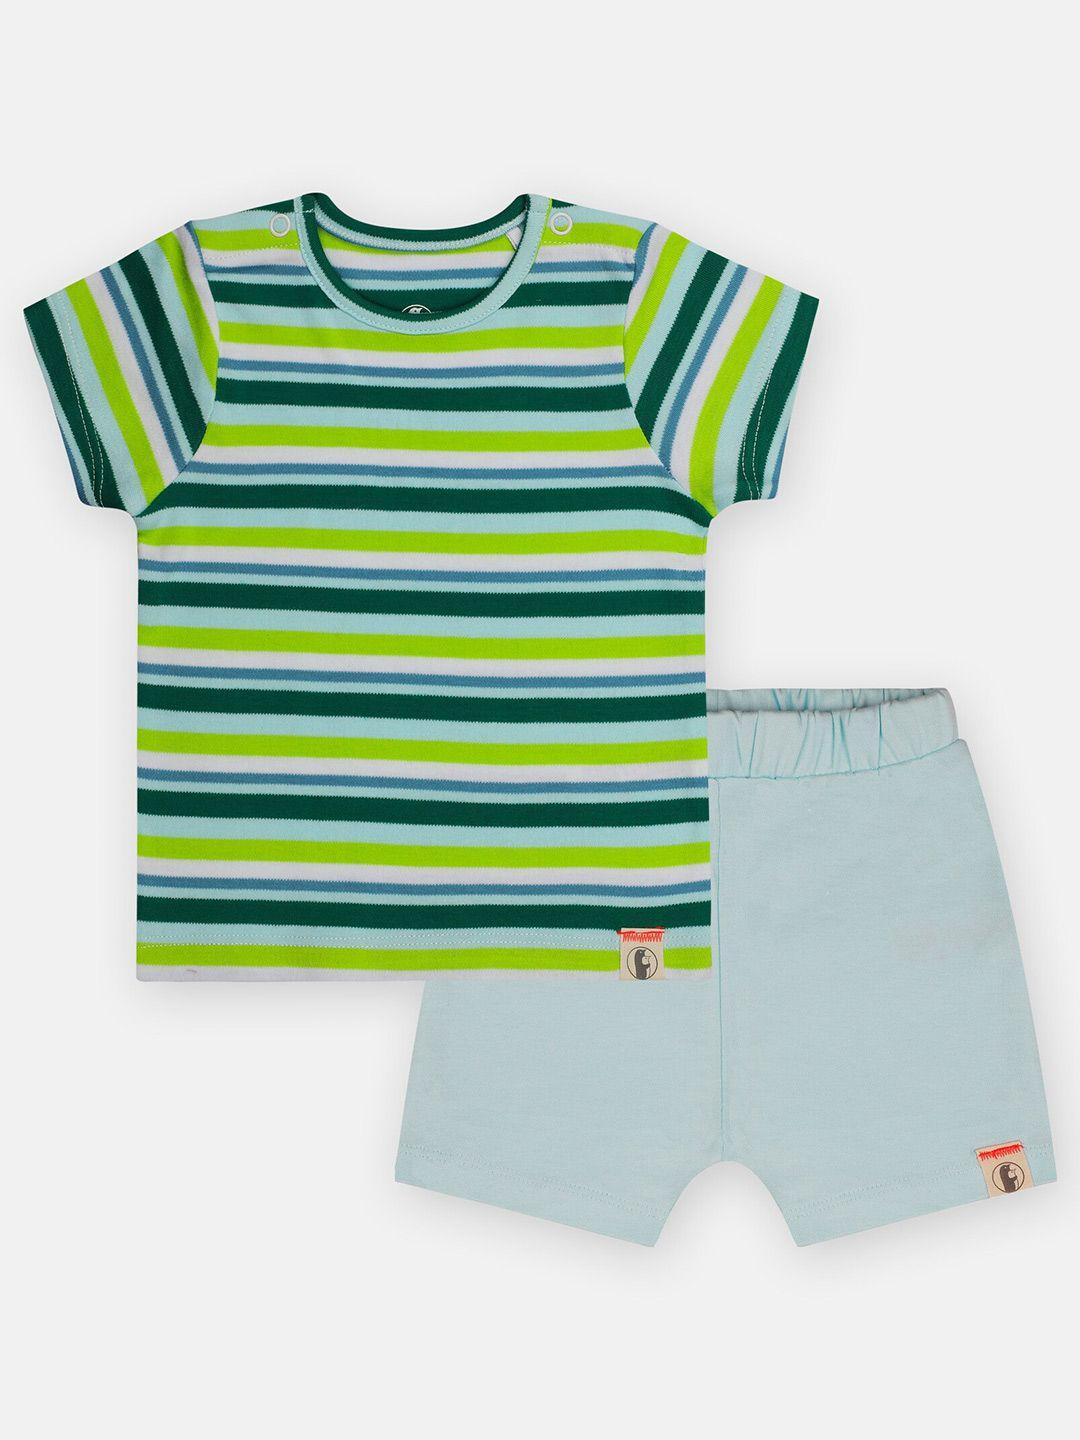 babysafe-boys-green-&-blue-striped-pure-cotton-t-shirt-with-shorts-set